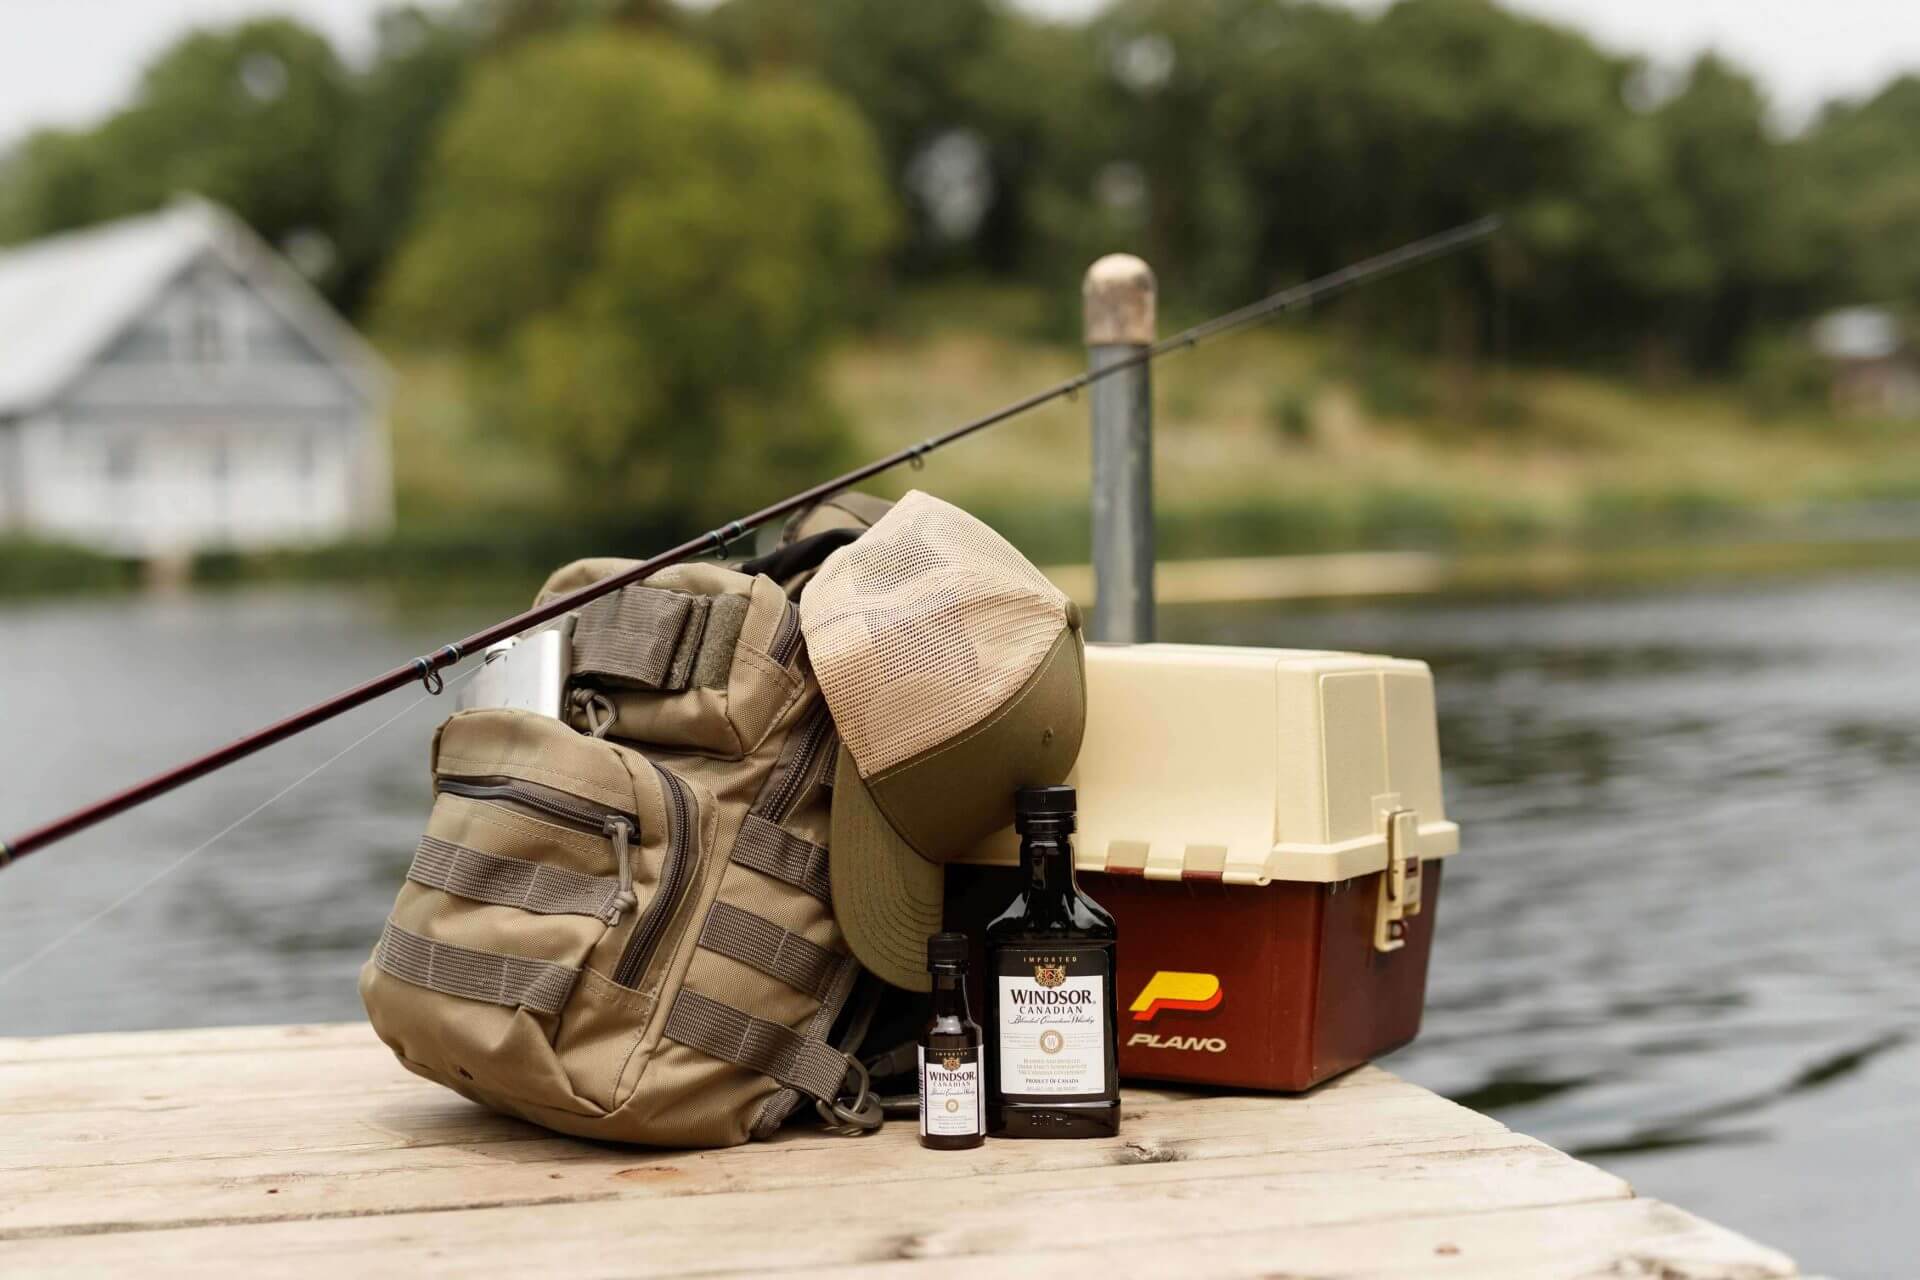 Fishing equipments beside a lake with Windsor shot and a mini bottle